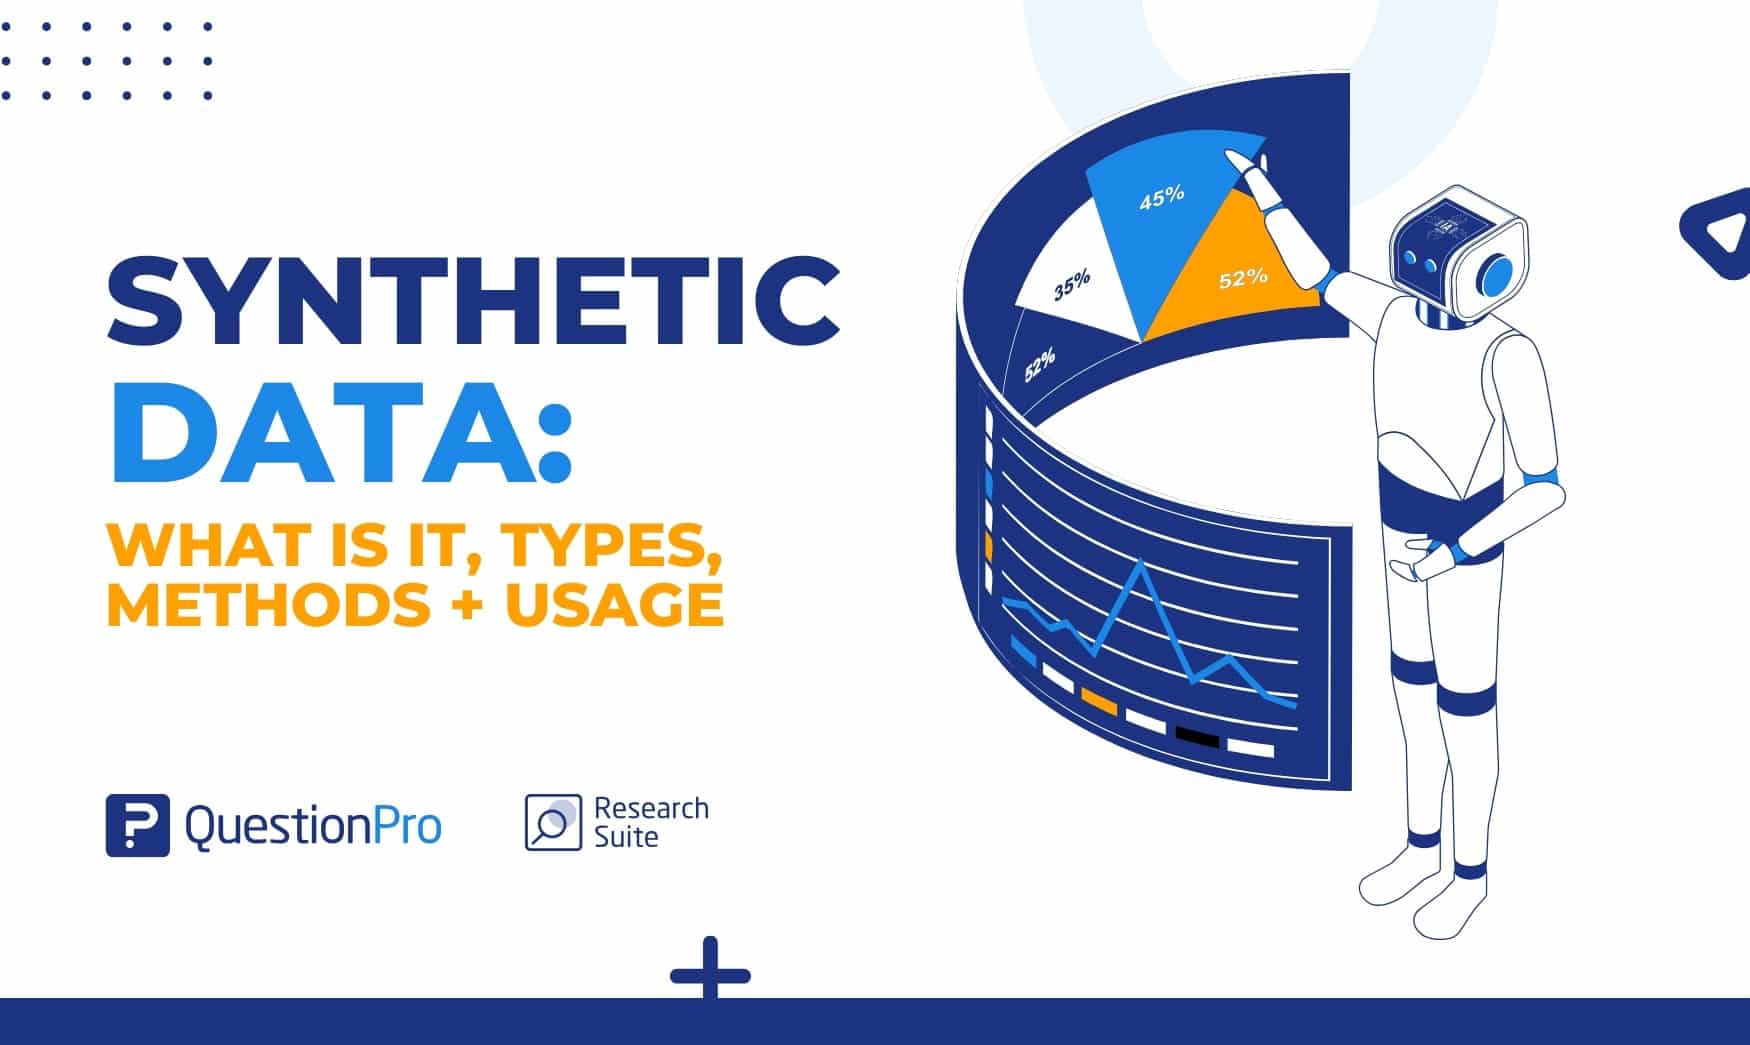 Explore the comprehensive guide to Synthetic Data. Understand its types, methods, and use cases for advanced data analysis and more.